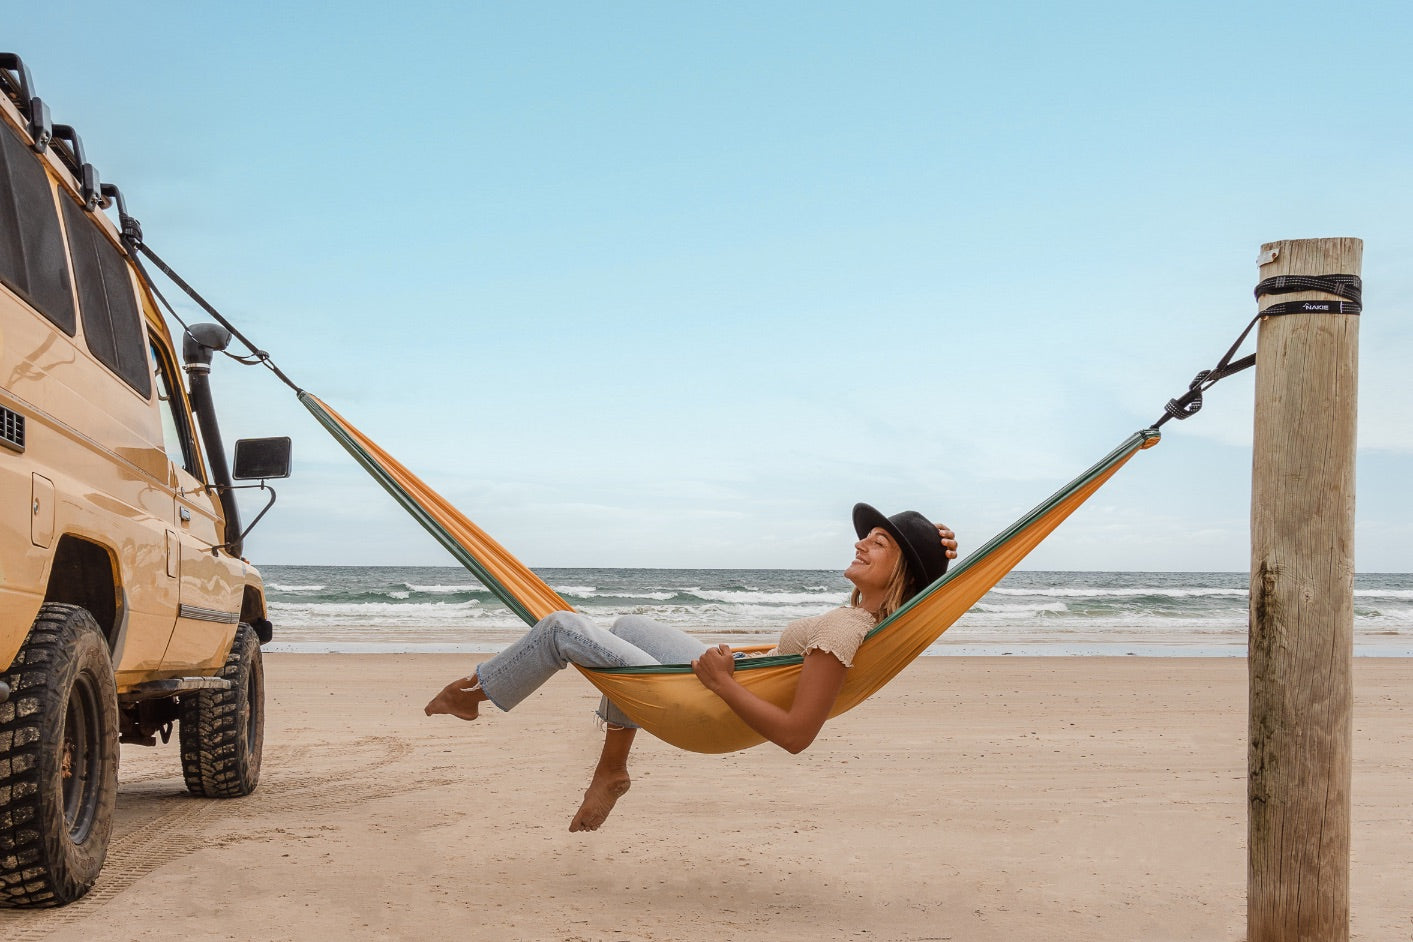 Golden Mango - Recycled Hammock with Straps